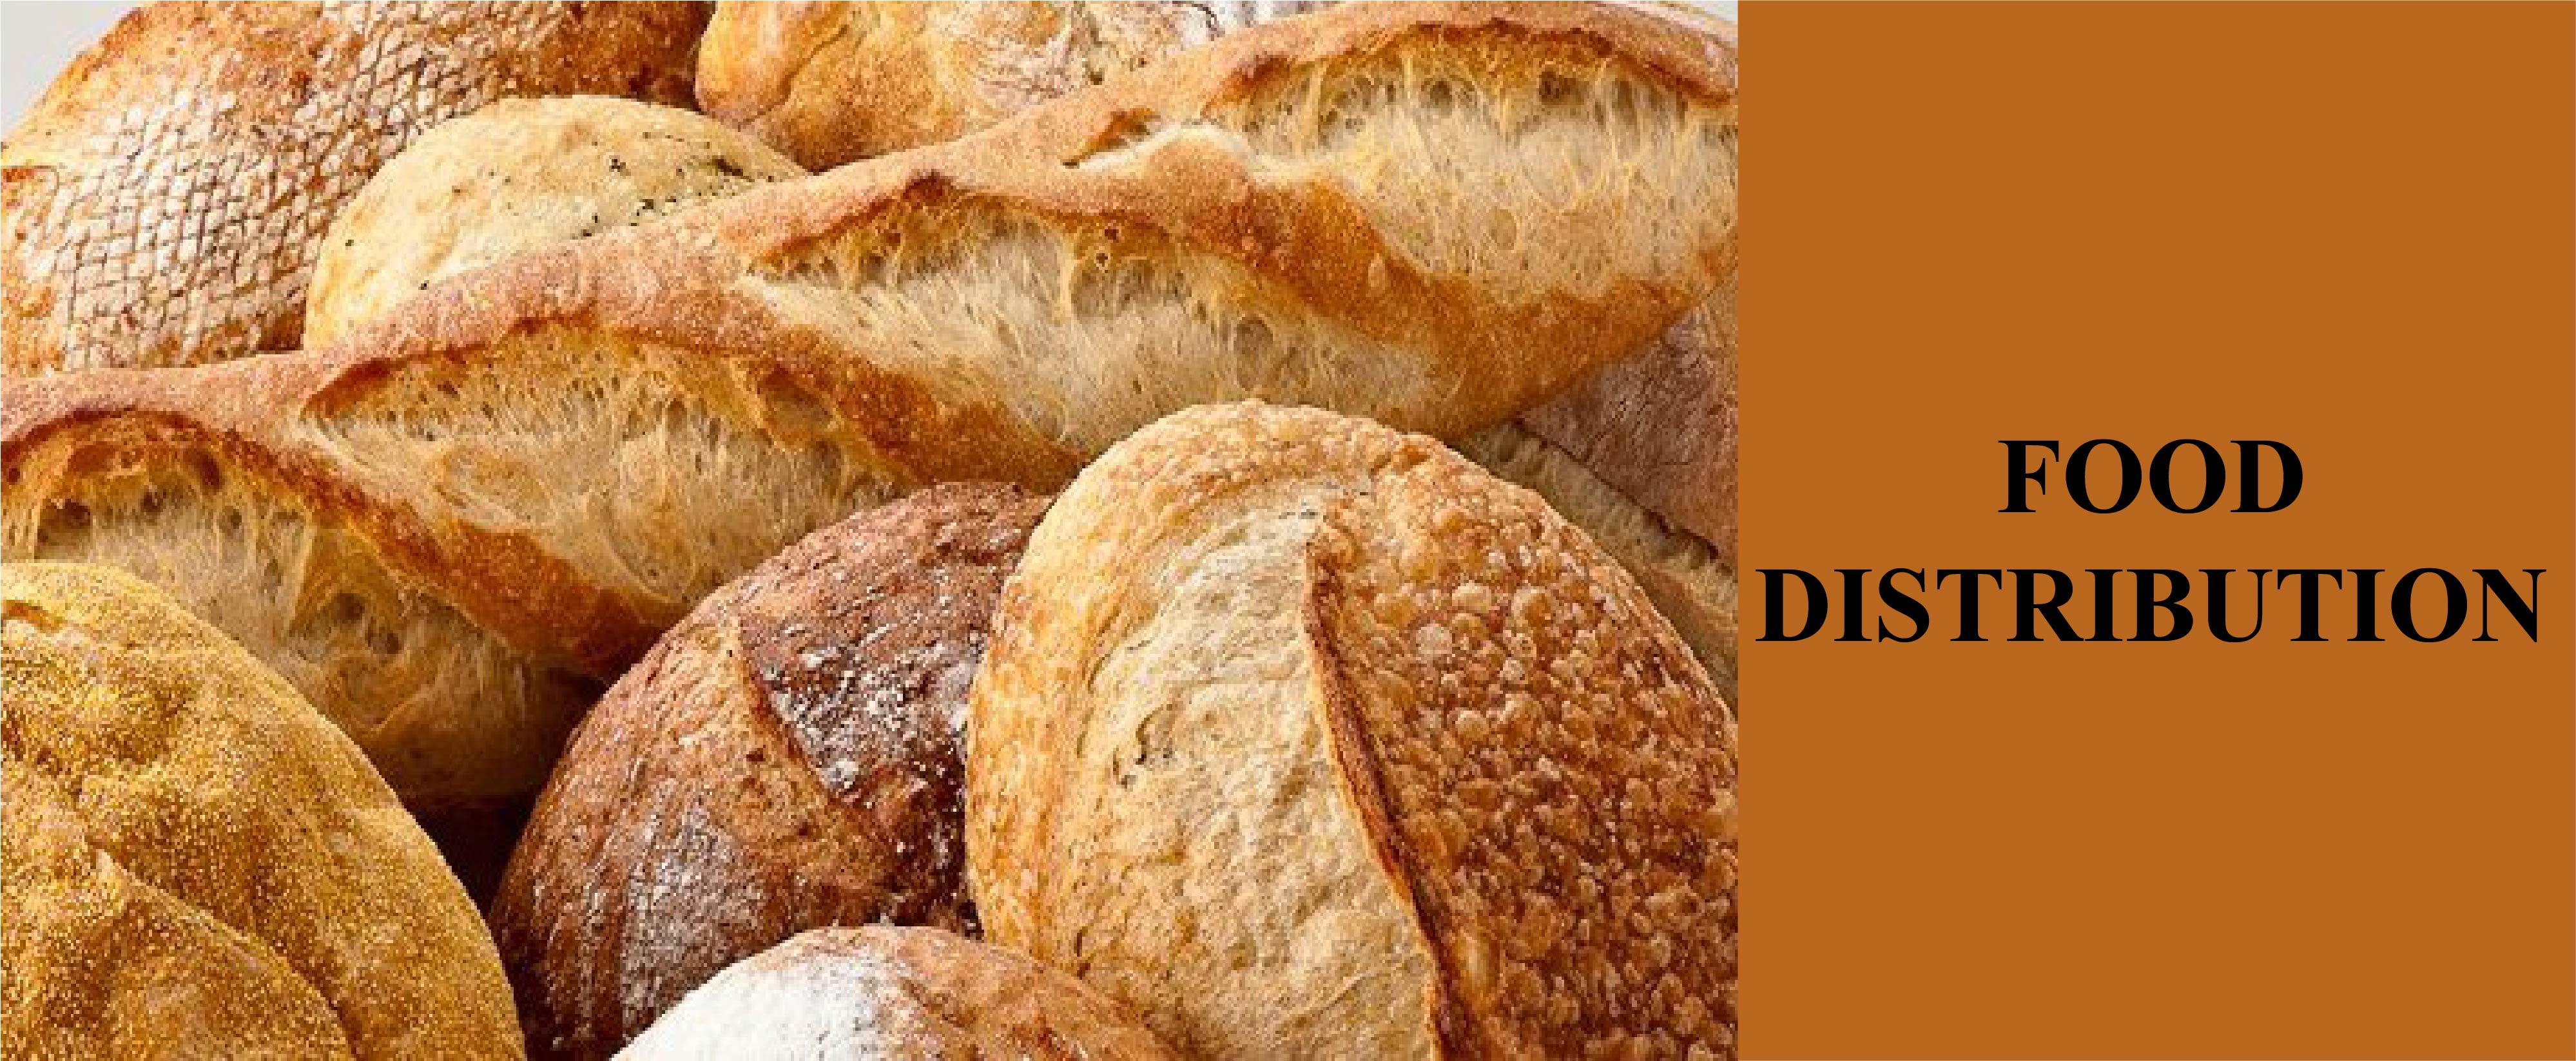 Distribute donated bread to those in need